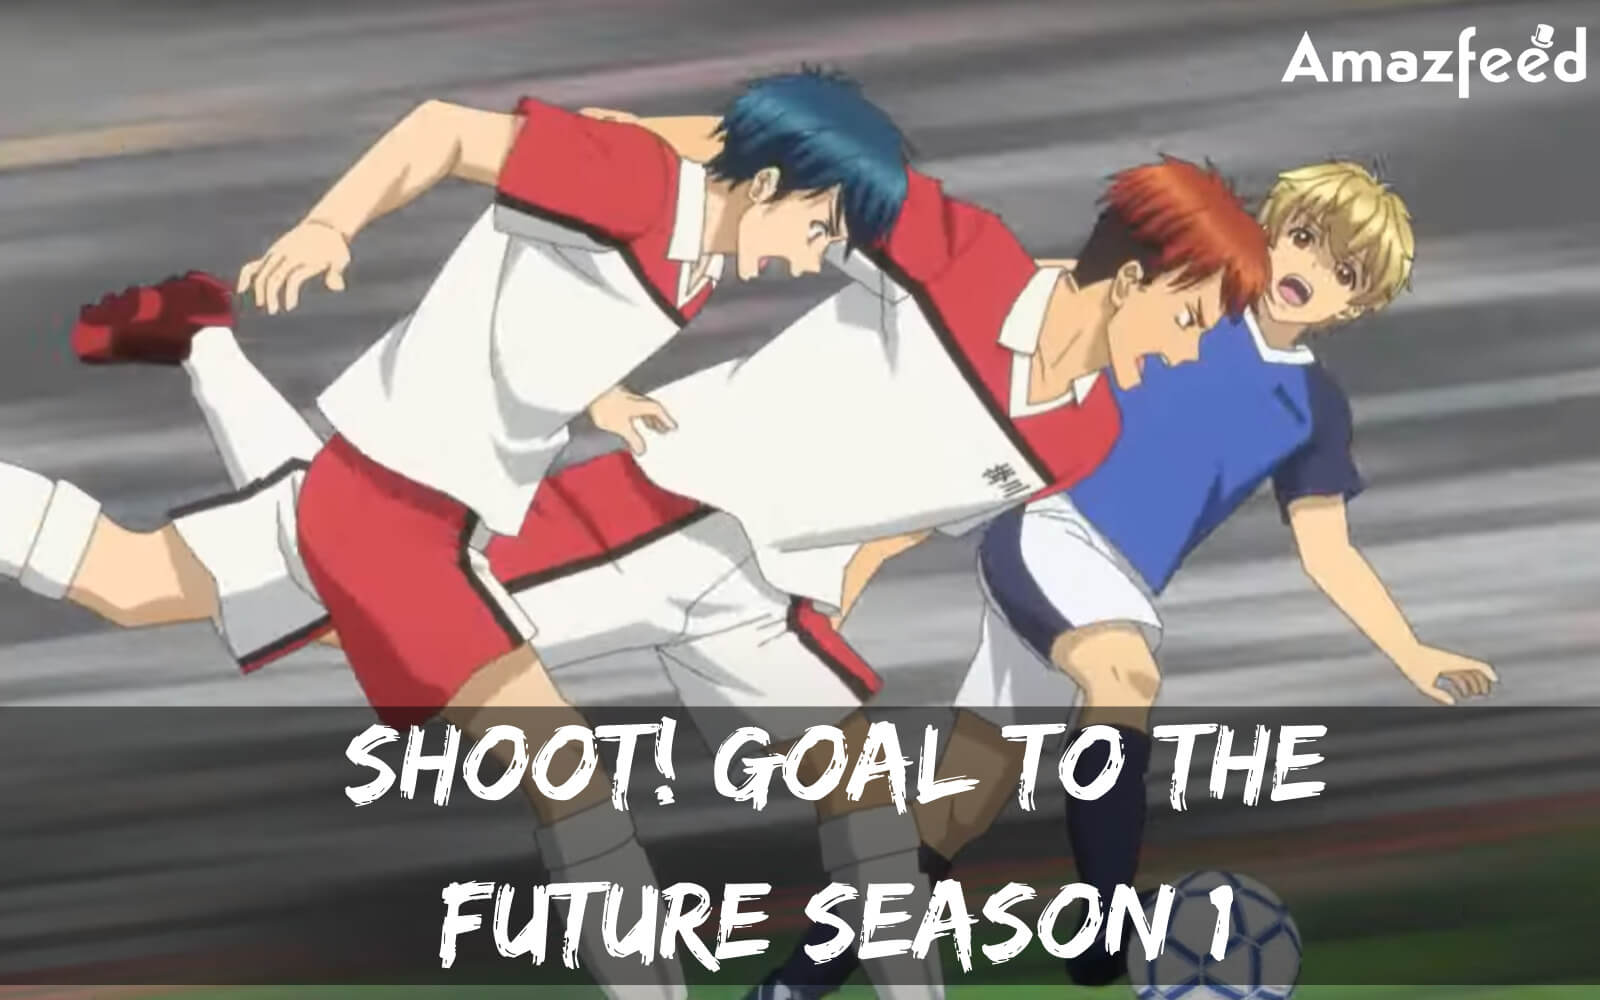 When Is Shoot! Goal to the Future Sesaon 1 Coming Out